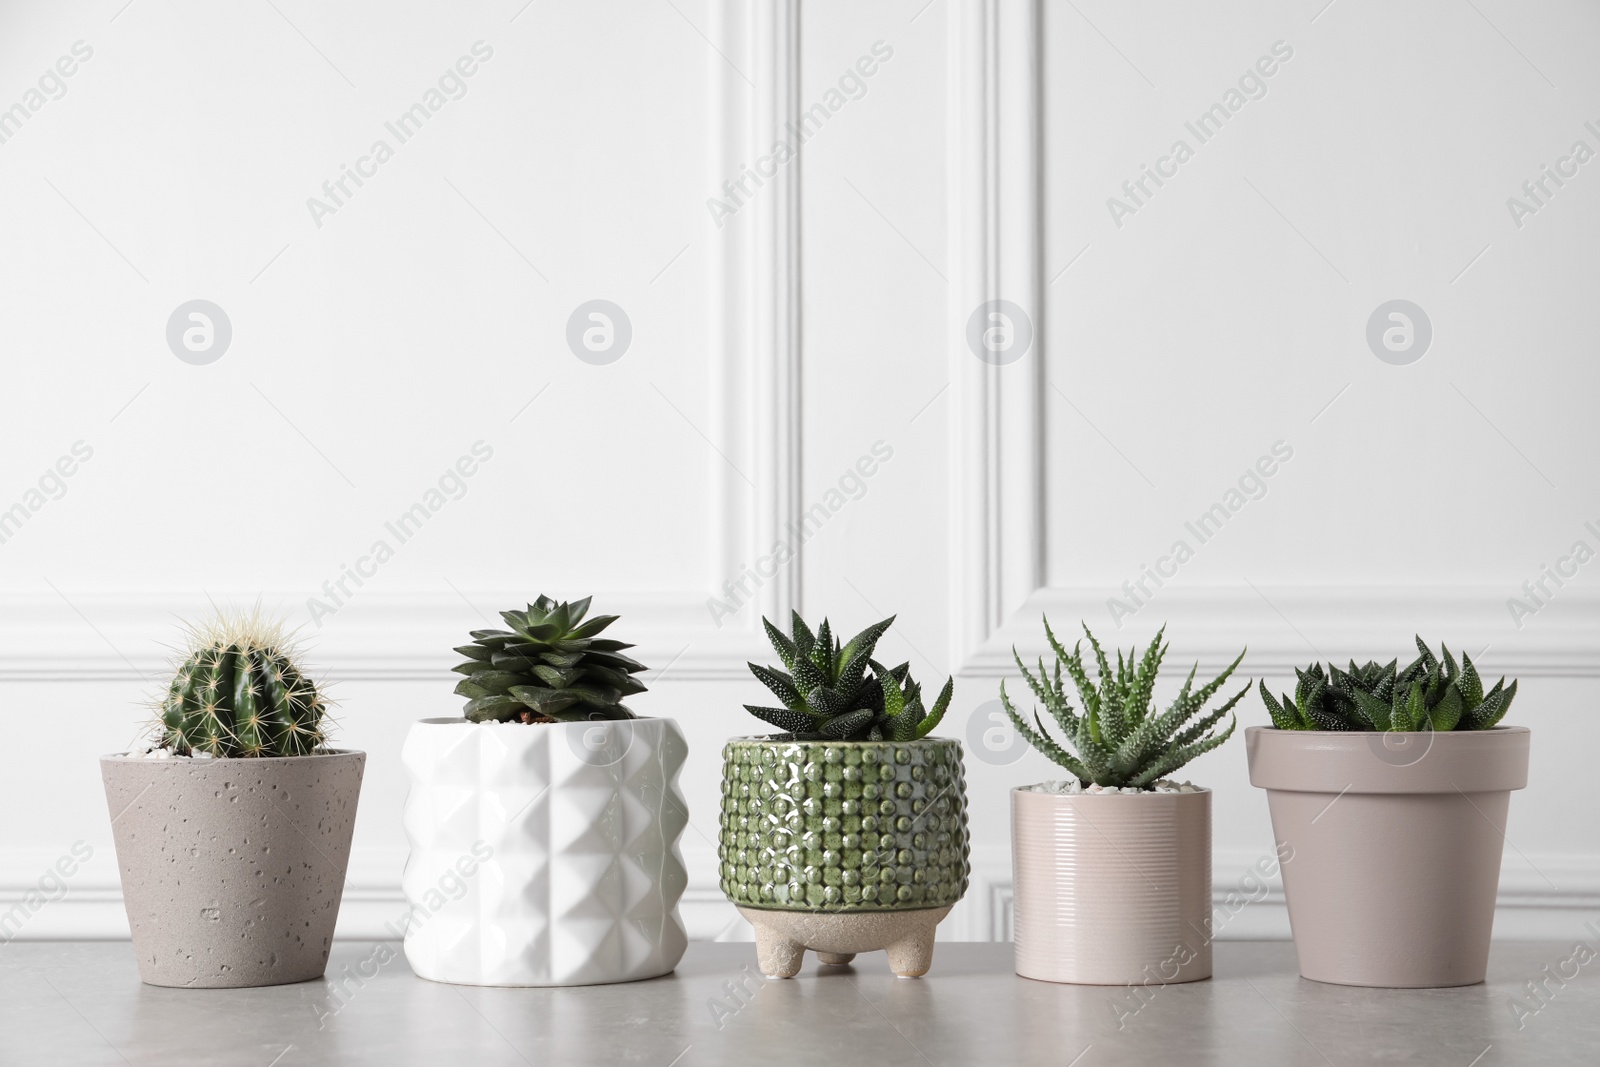 Photo of Different house plants in pots on light table